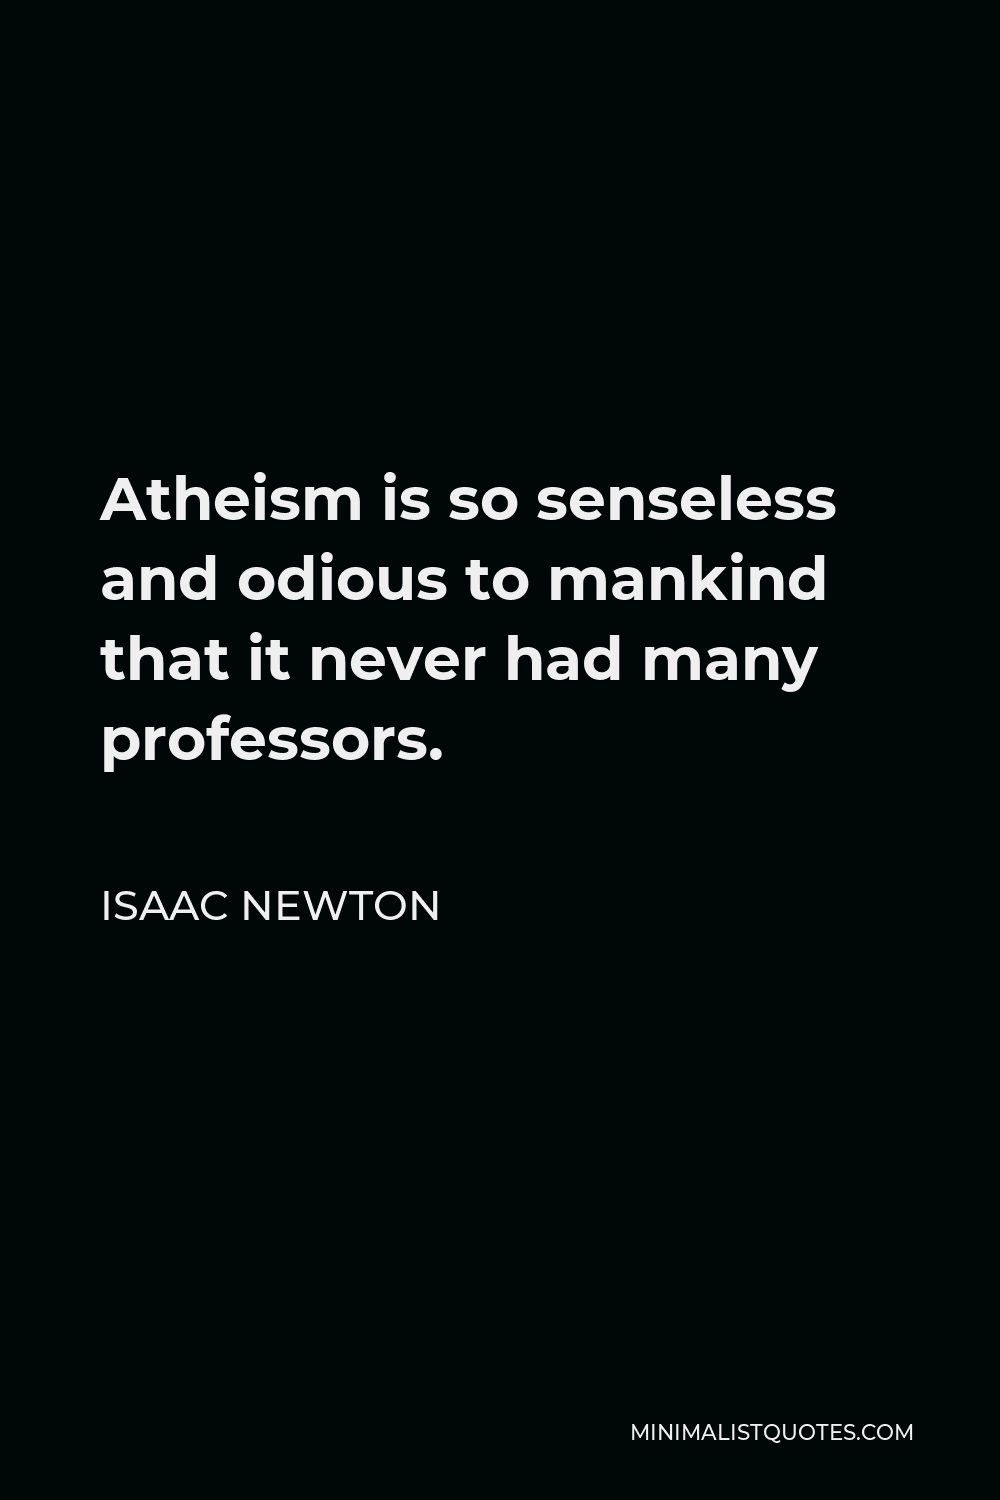 isaac-newton-quote-atheism-is-so-senseless-and-odious-to-mankind-that-it-never-had-many-professors